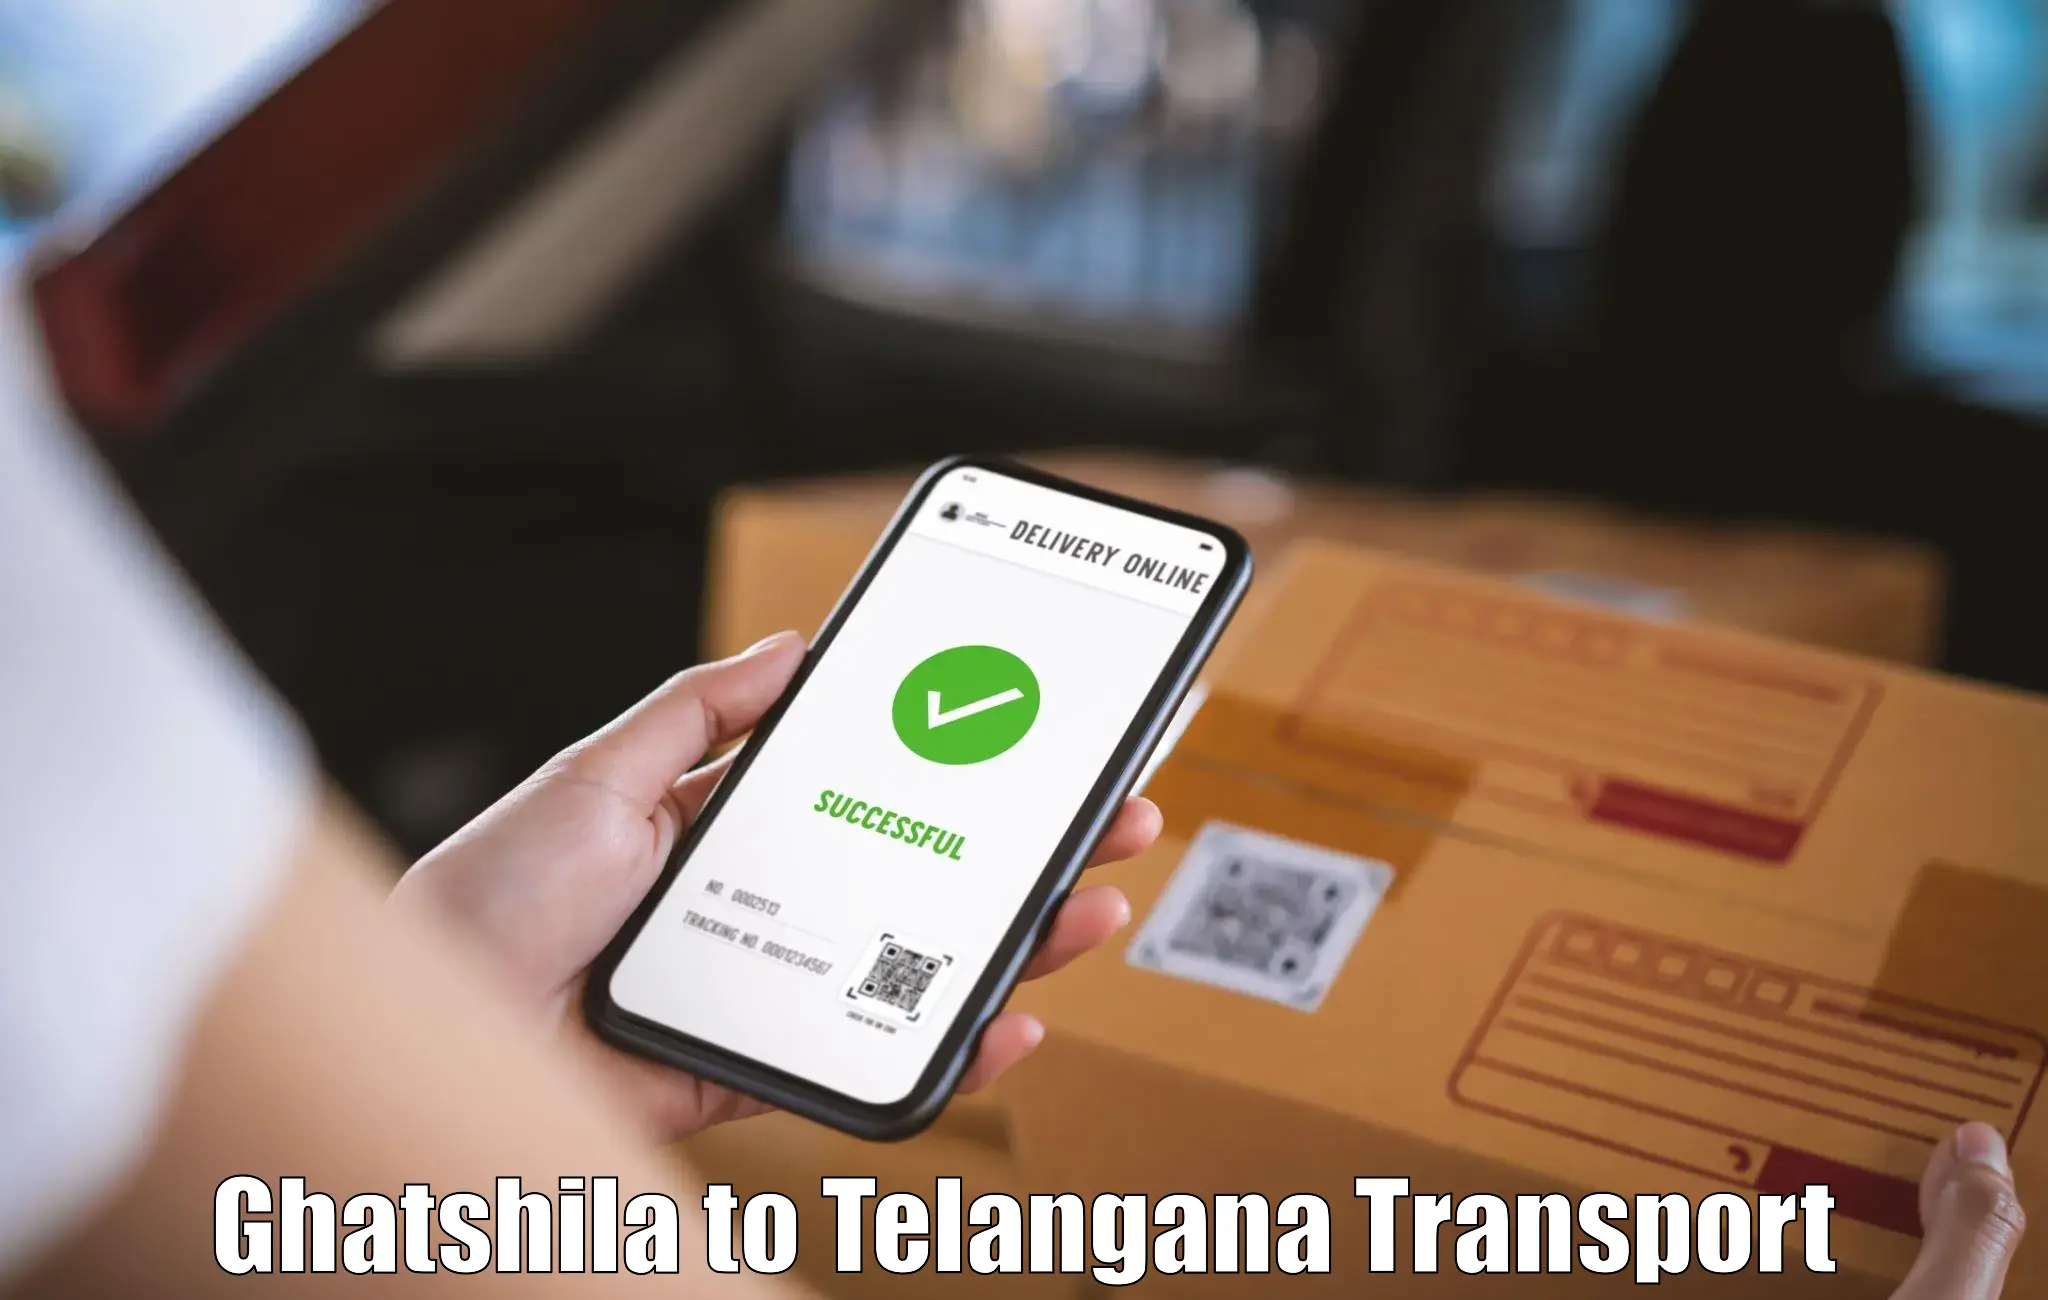 Transport shared services Ghatshila to Narayankhed